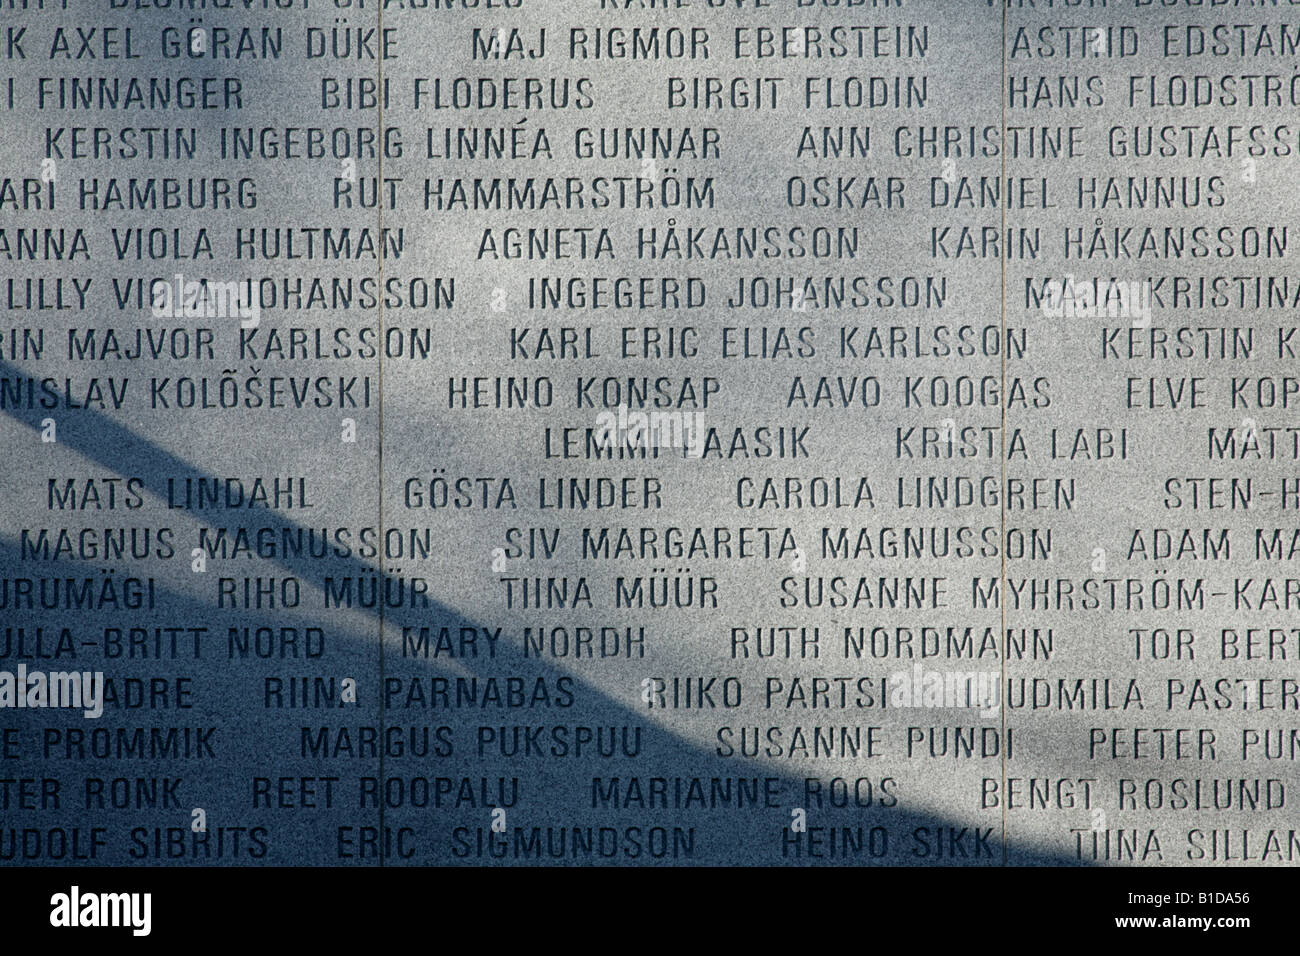 Memorial To The Victims Of The Estonia Ferry Disaster Of 28